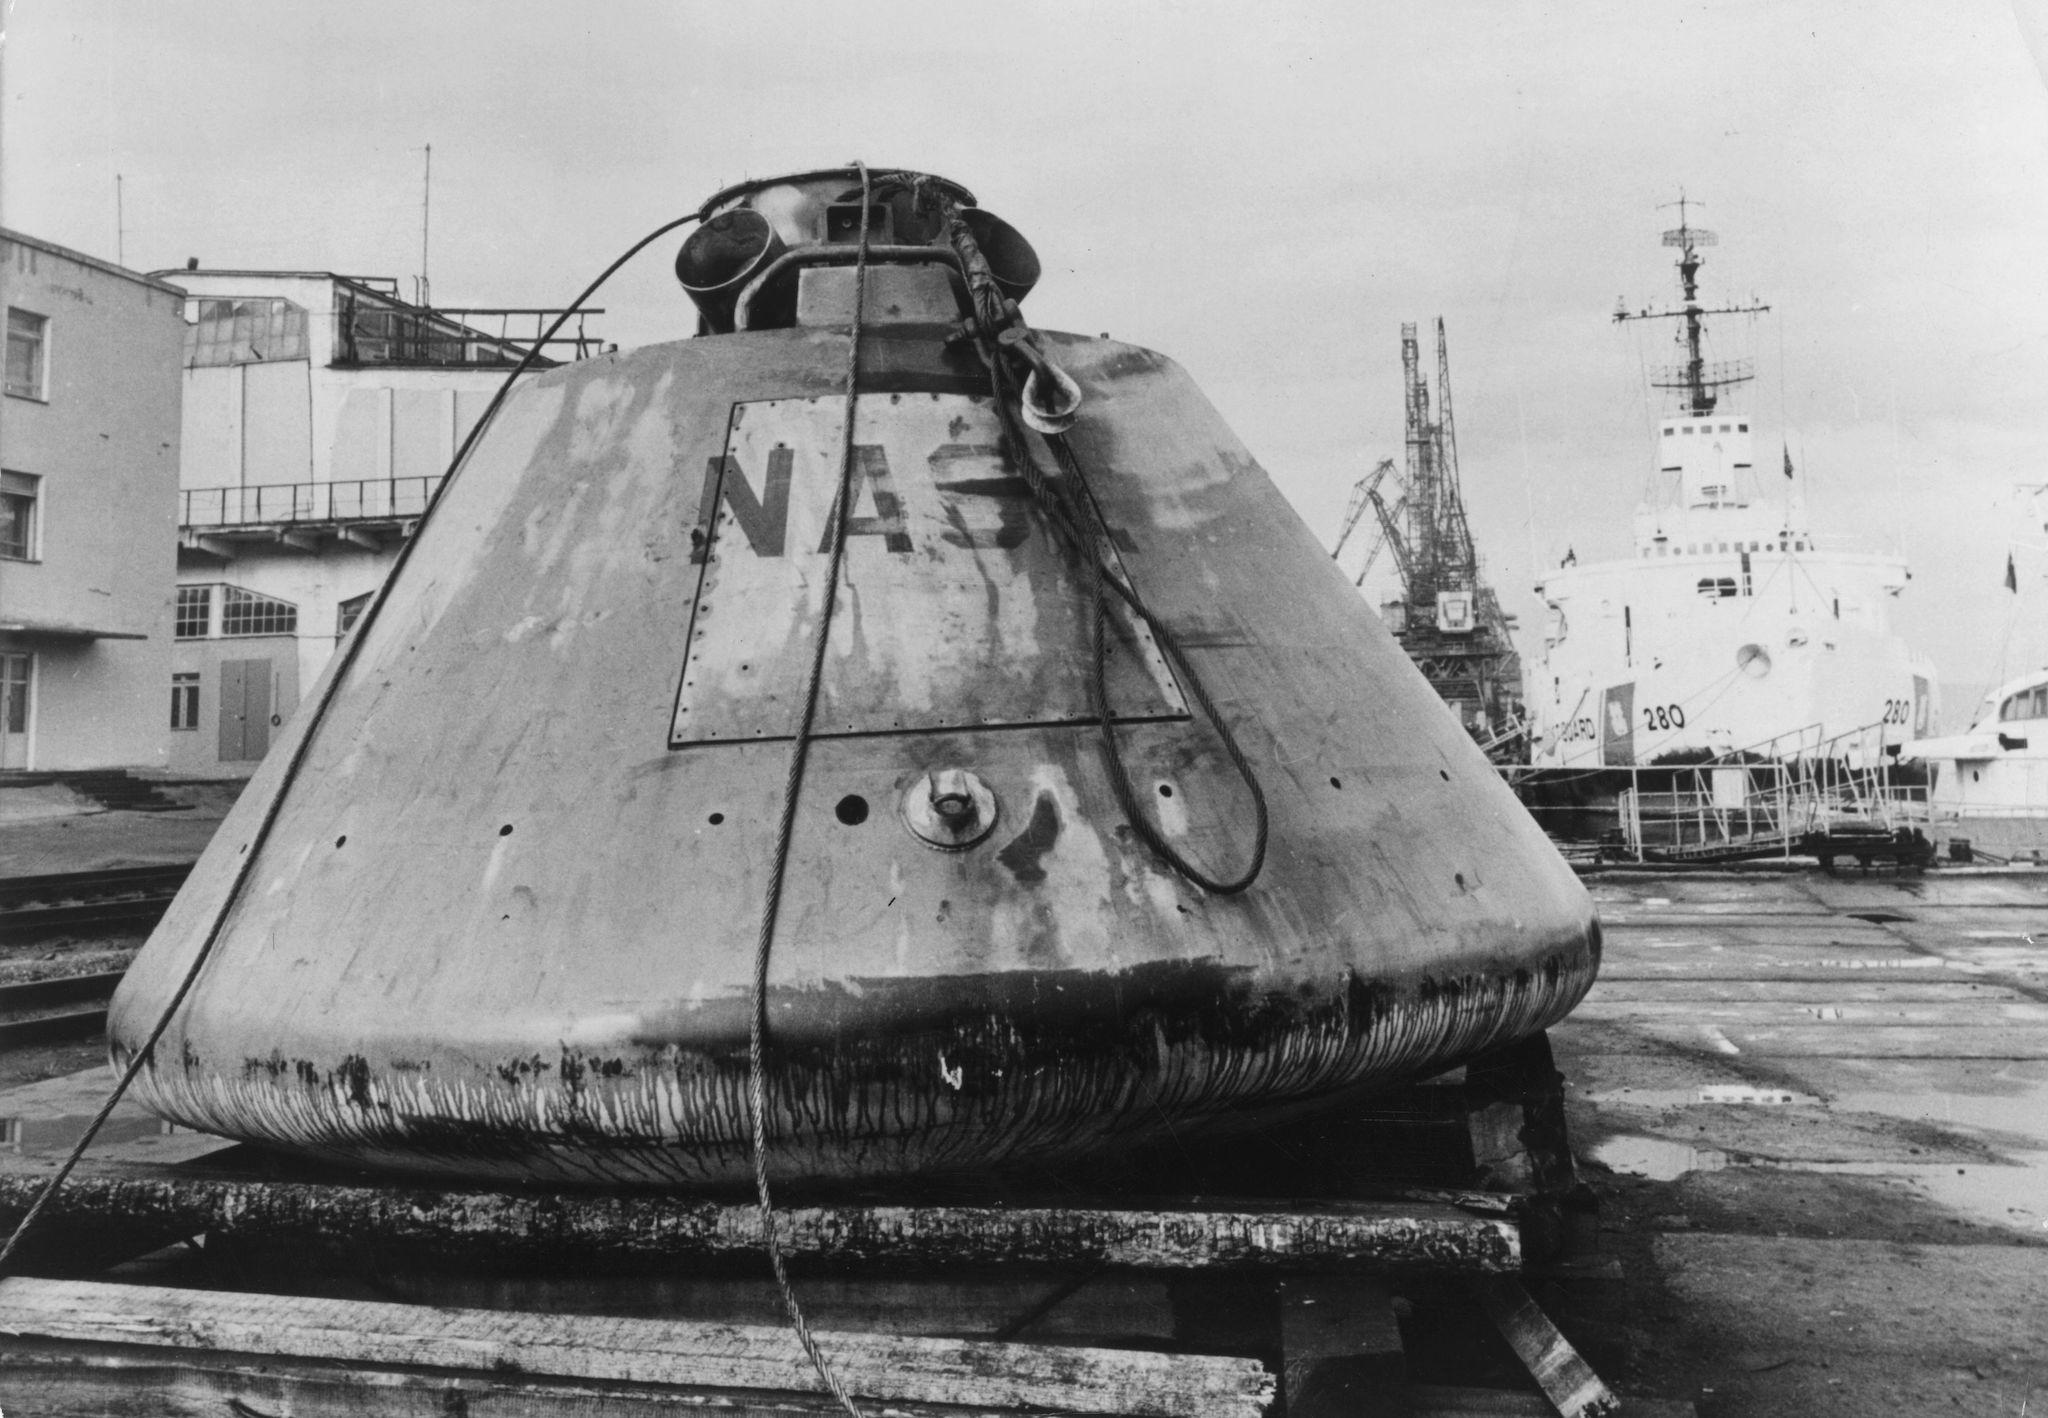 The Apollo boilerplate capsule BP-1227 at the docks at Murmansk after being recovered by Soviet fishermen in the Golfe de Gascogne (Bay of Biscay), France. It was later returned to the US